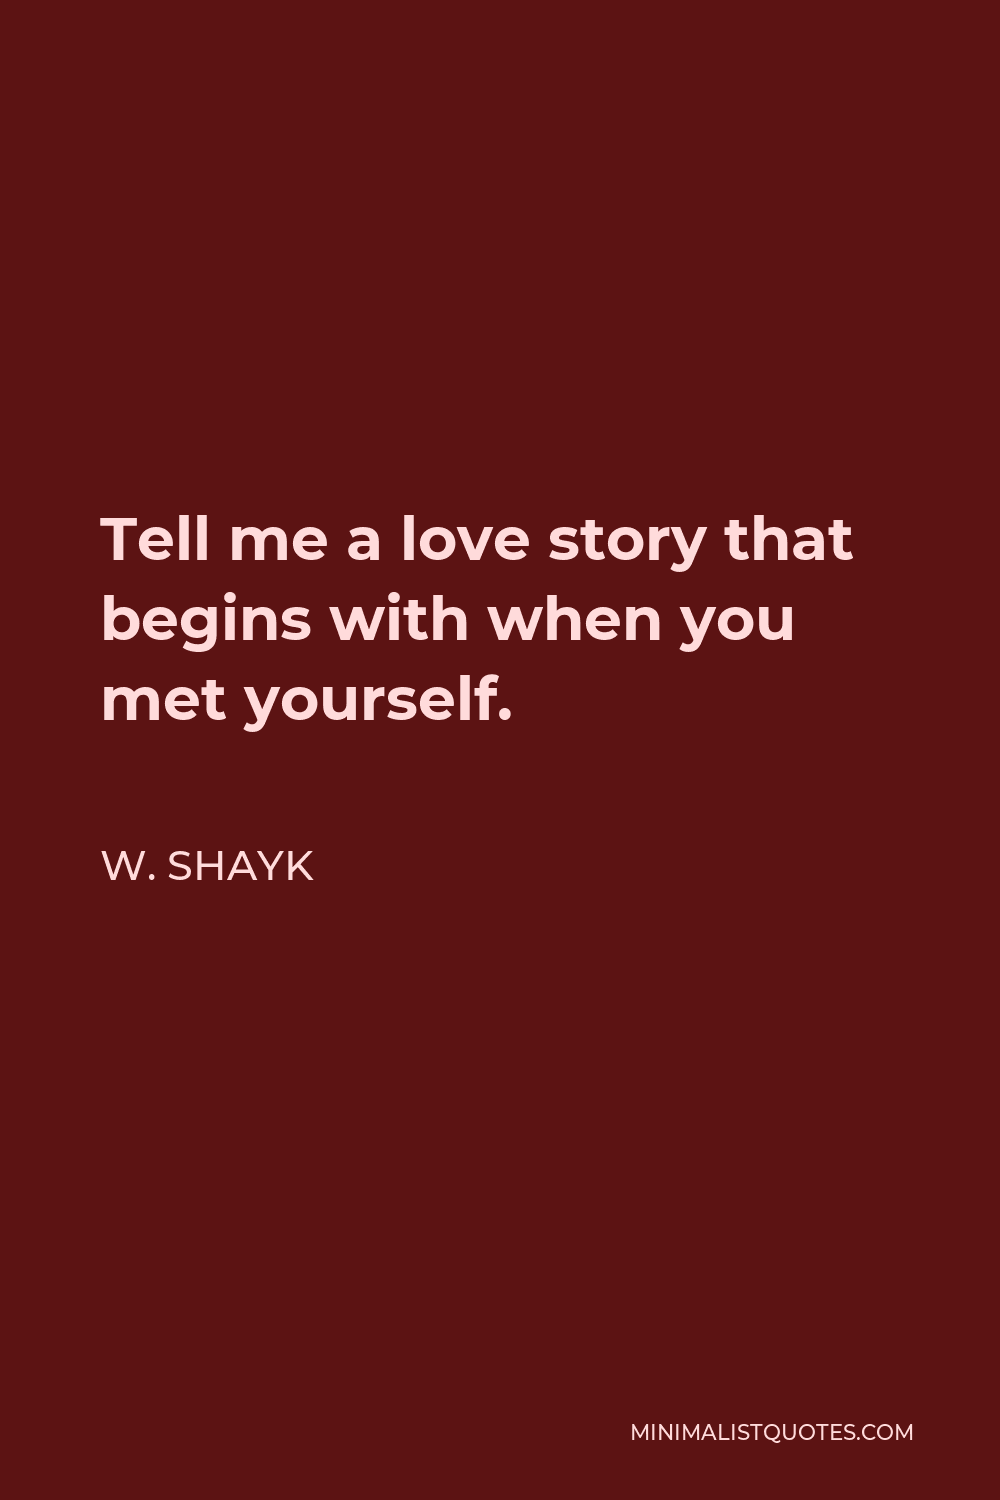 W. Shayk Quote - Tell me a love story that begins with when you met yourself.